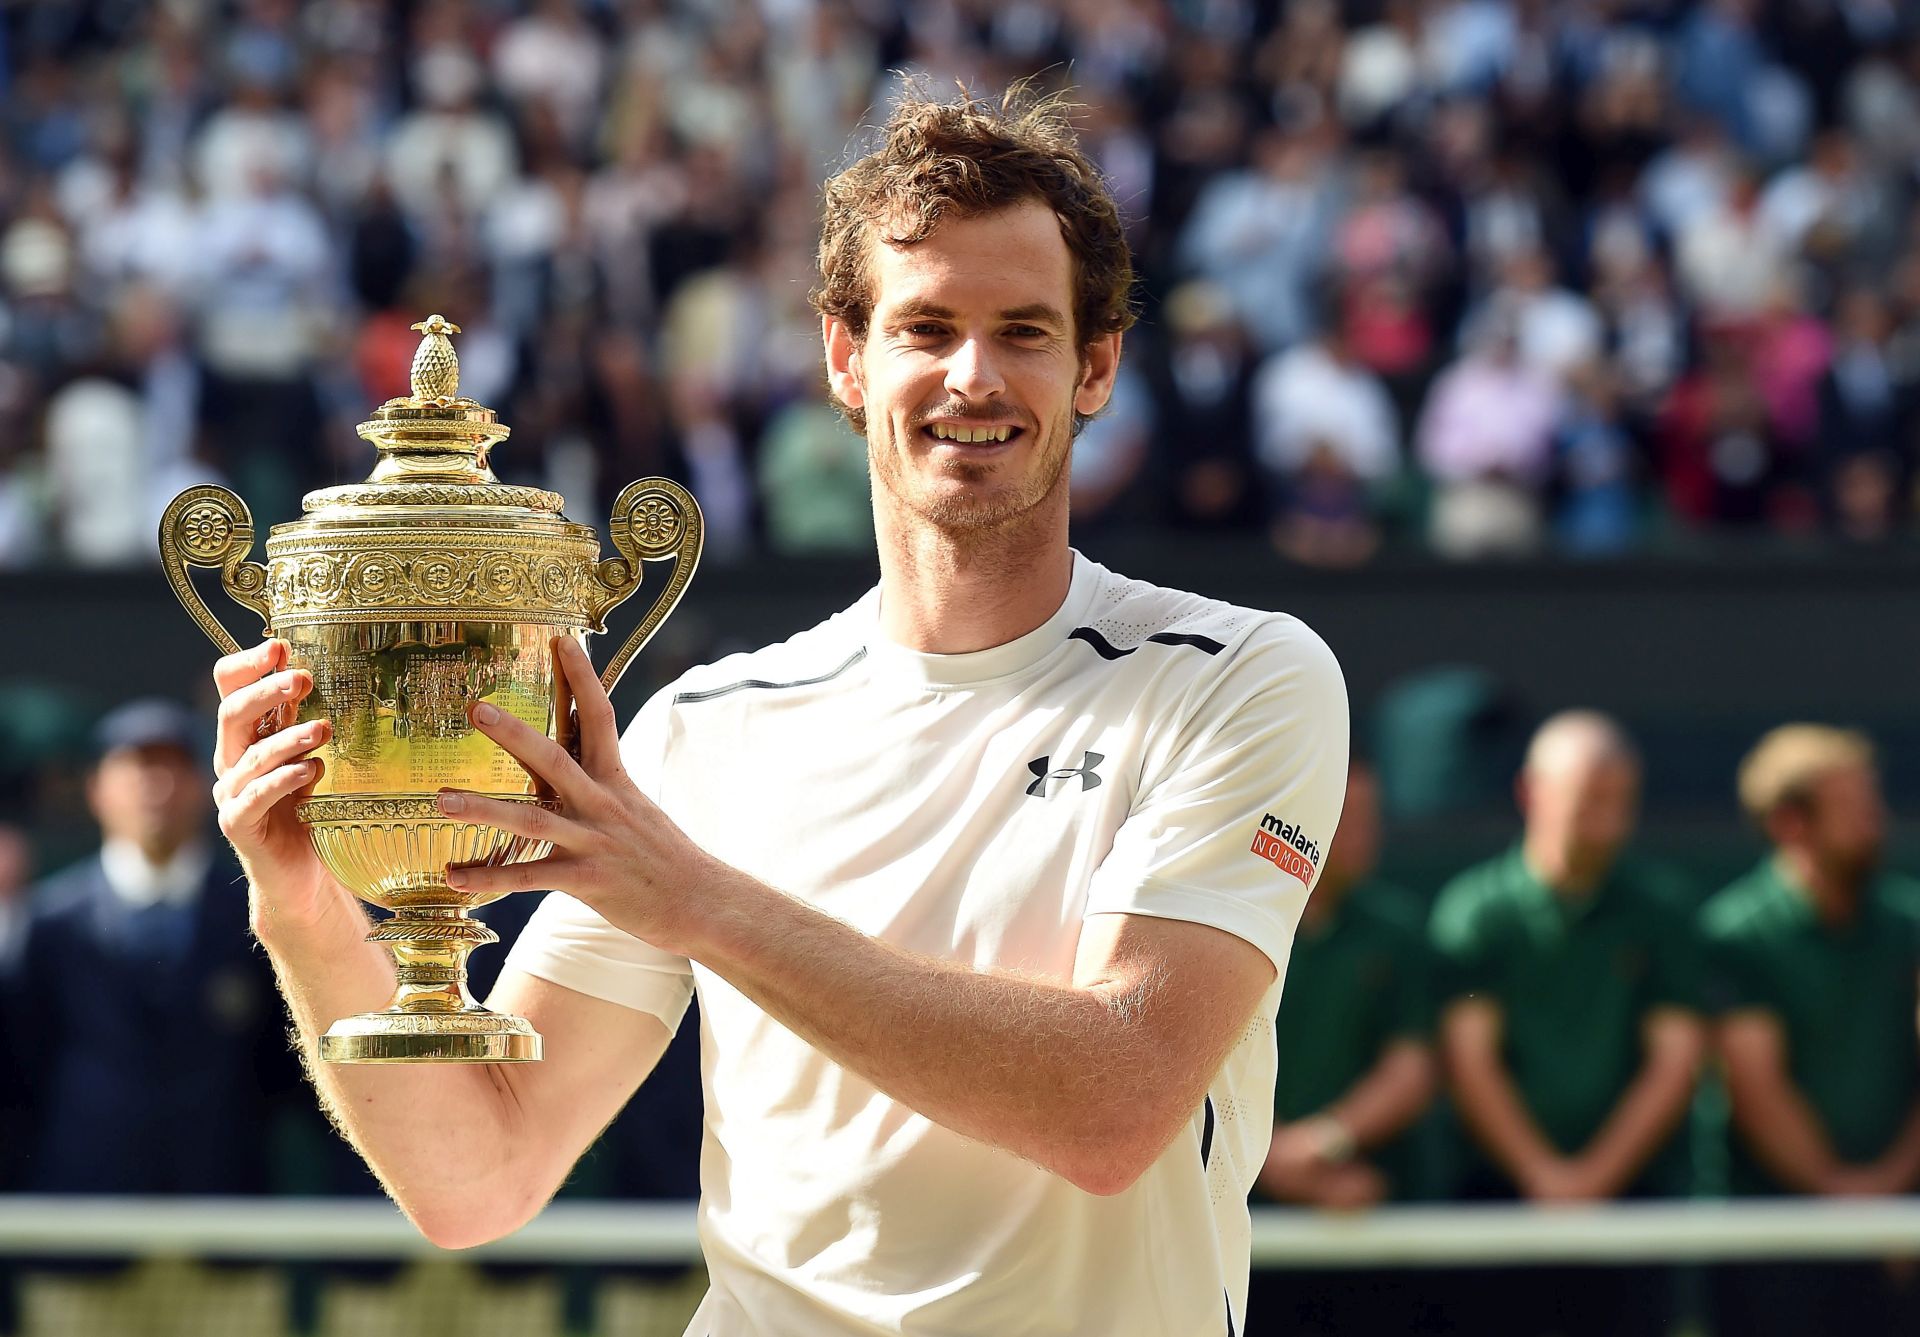 epa05418758 Andy Murray of Britain with the championship trophy following his win over Milos Raonic of Canada in the men's singles final of the Wimbledon Championships at the All England Lawn Tennis Club, in London, Britain, 10 July 2016.  EPA/ANDY RAIN EDITORIAL USE ONLY/NO COMMERCIAL SALES